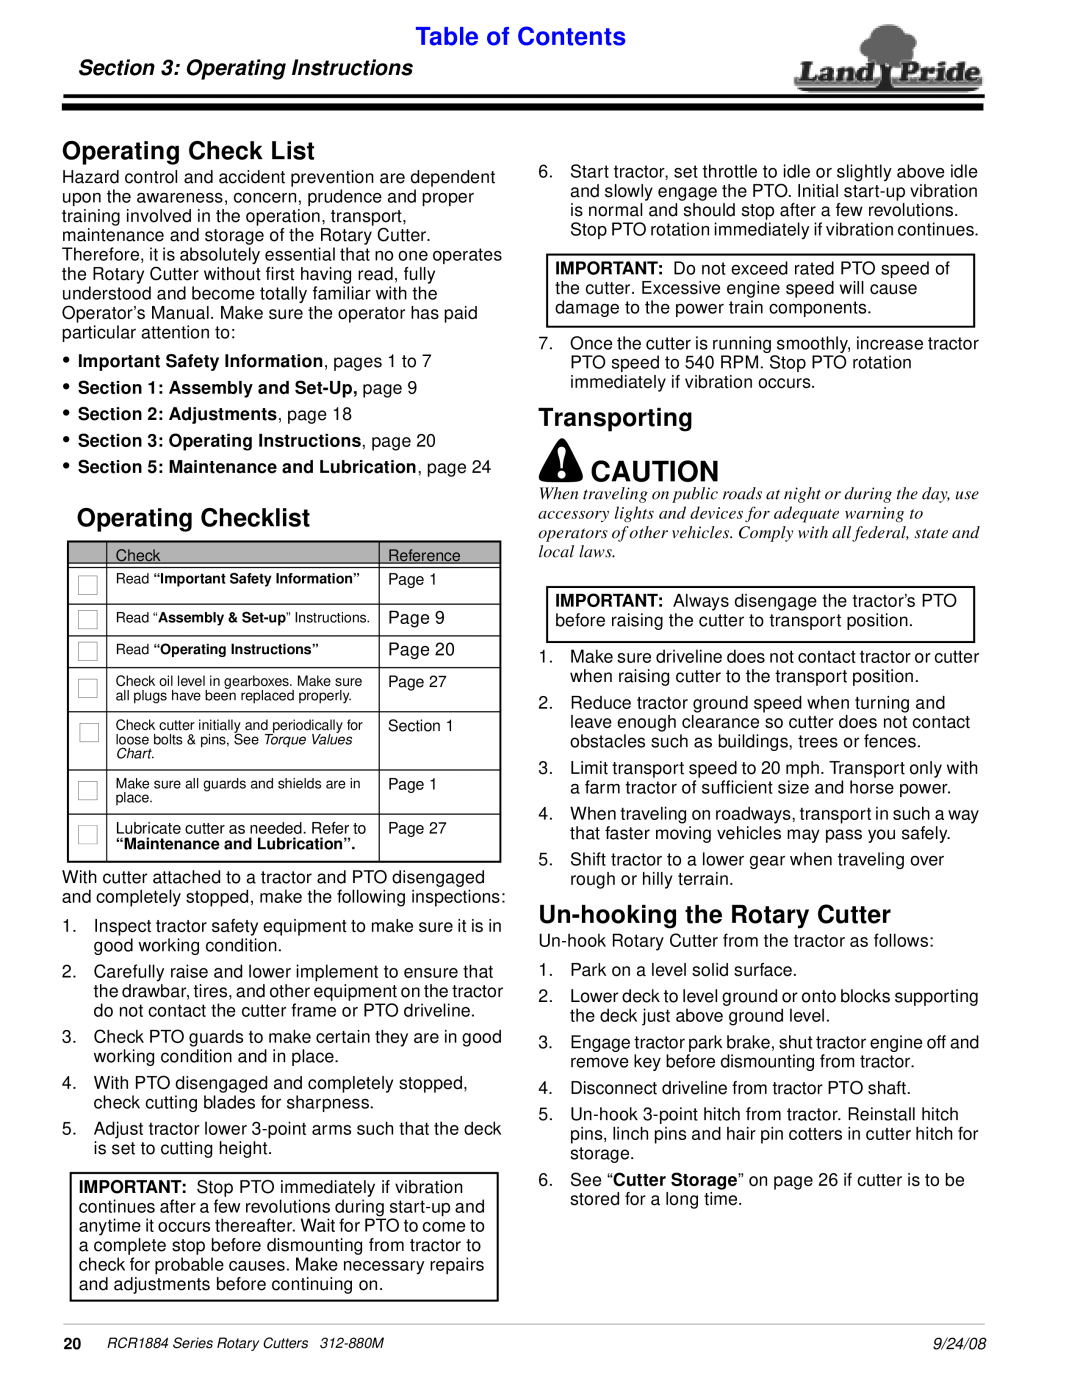 Land Pride RCR1884 Operating Check List, Operating Checklist, Transporting, Un-hookingthe Rotary Cutter, Table of Contents 